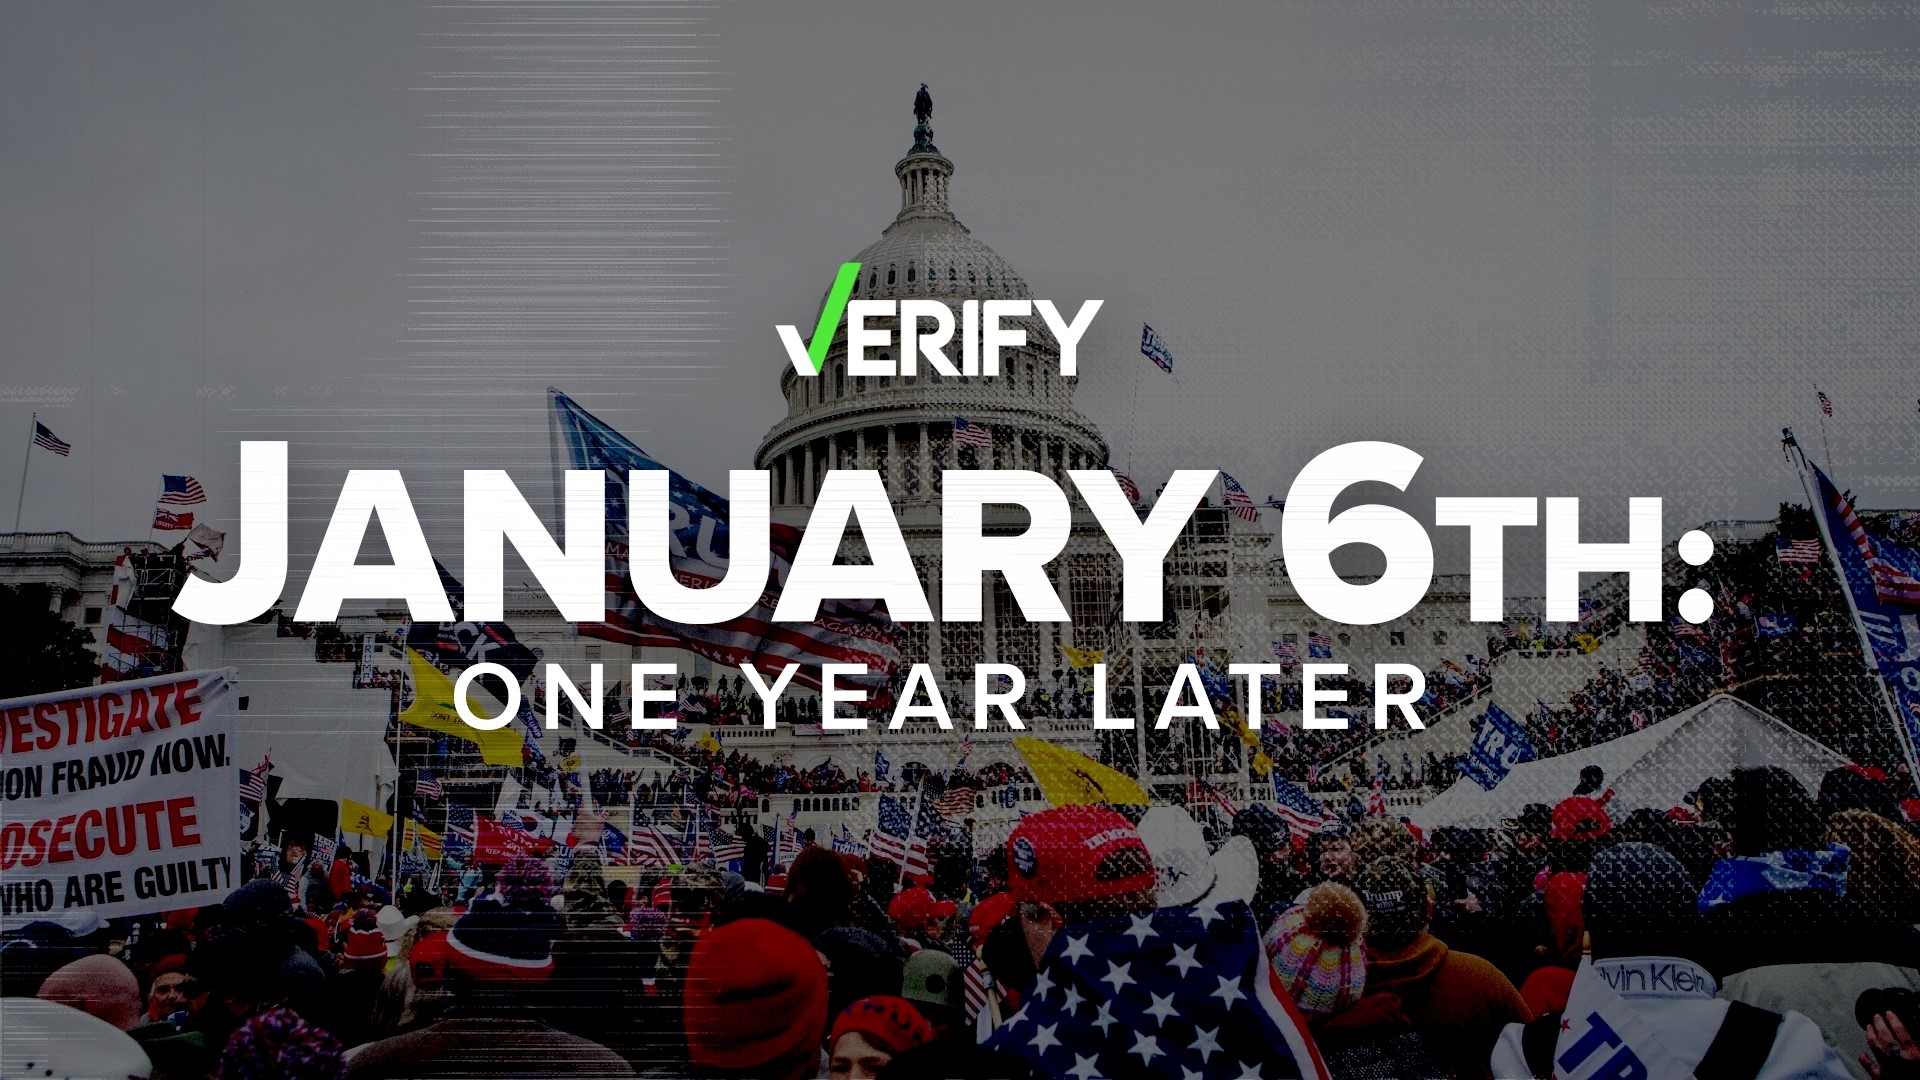 Today marks one year since the deadly insurrection at the U.S. Capitol. The VERIFY team looked into three claims to help you separate fact from fiction.